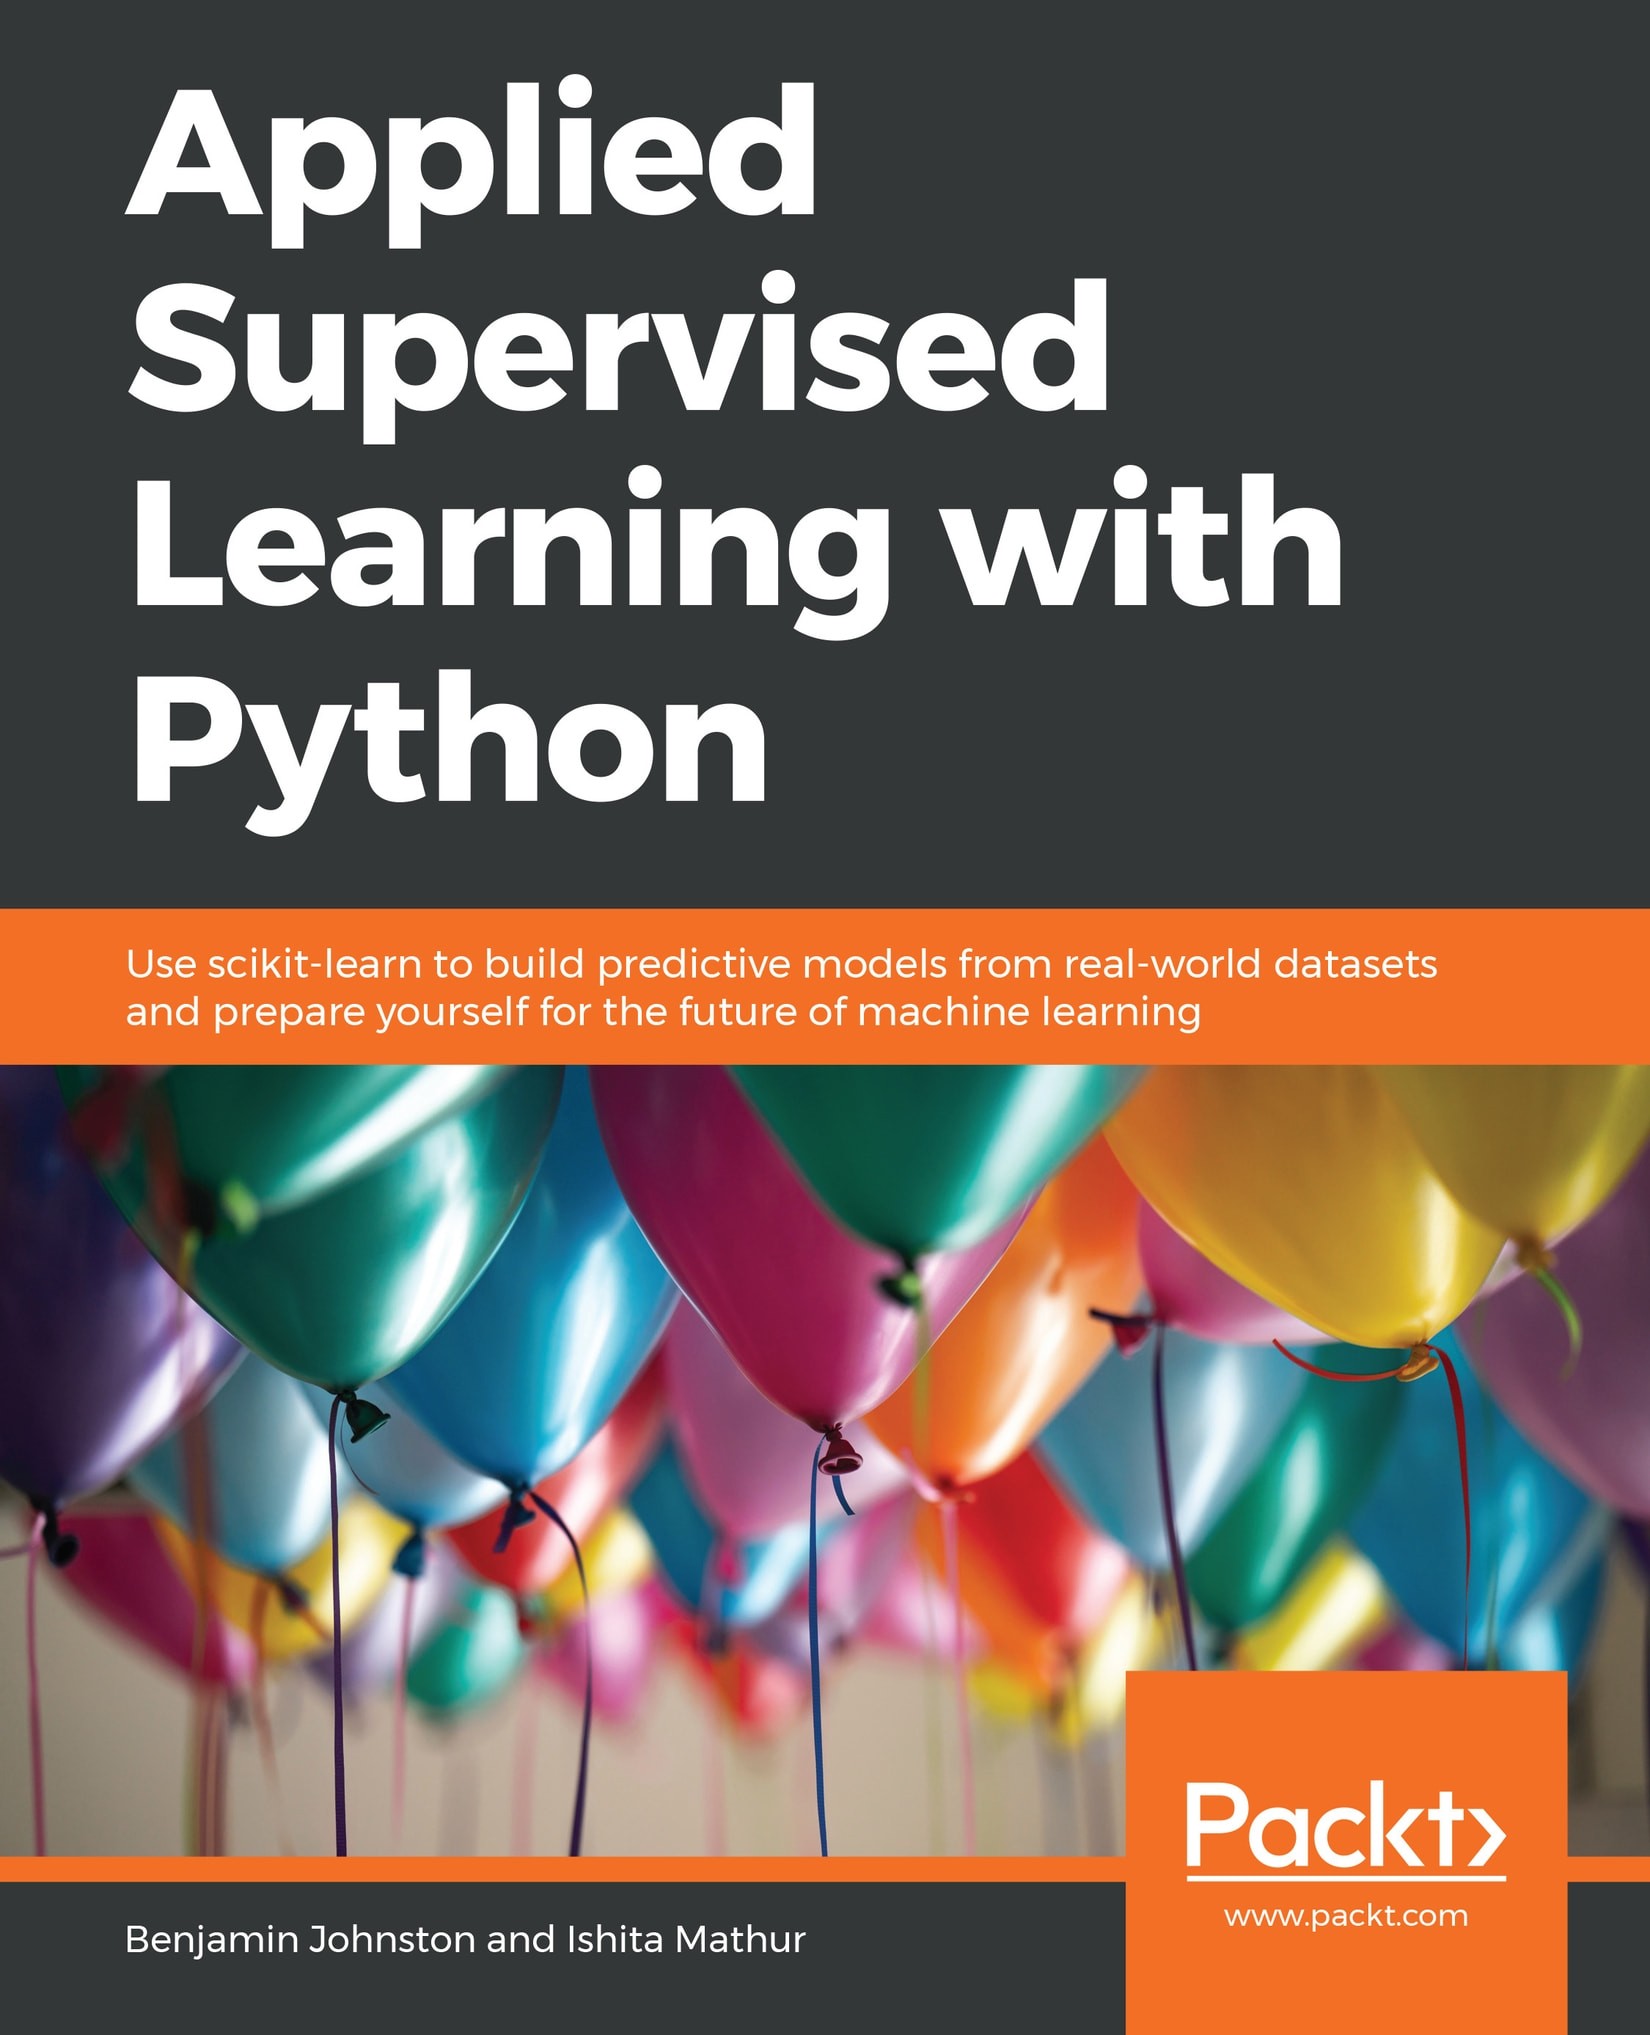 Applied Supervised Learning With Python: Use Scikit-Learn to Build Predictive Models From Real-World Datasets and Prepare Yourself for the Future of Machine Learning